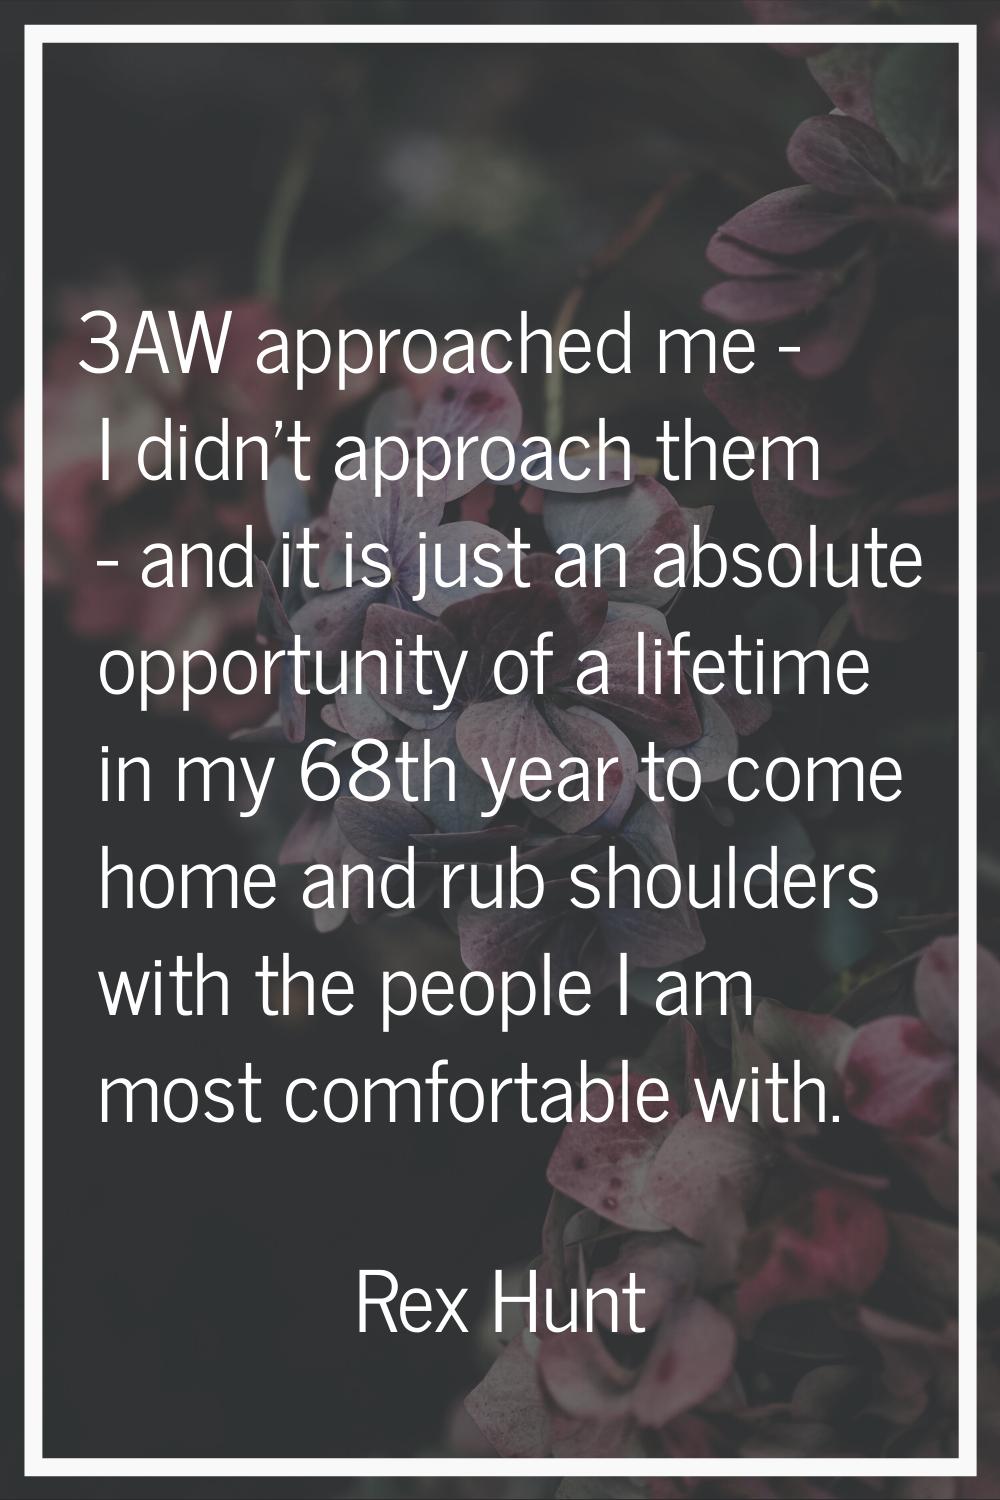 3AW approached me - I didn't approach them - and it is just an absolute opportunity of a lifetime i